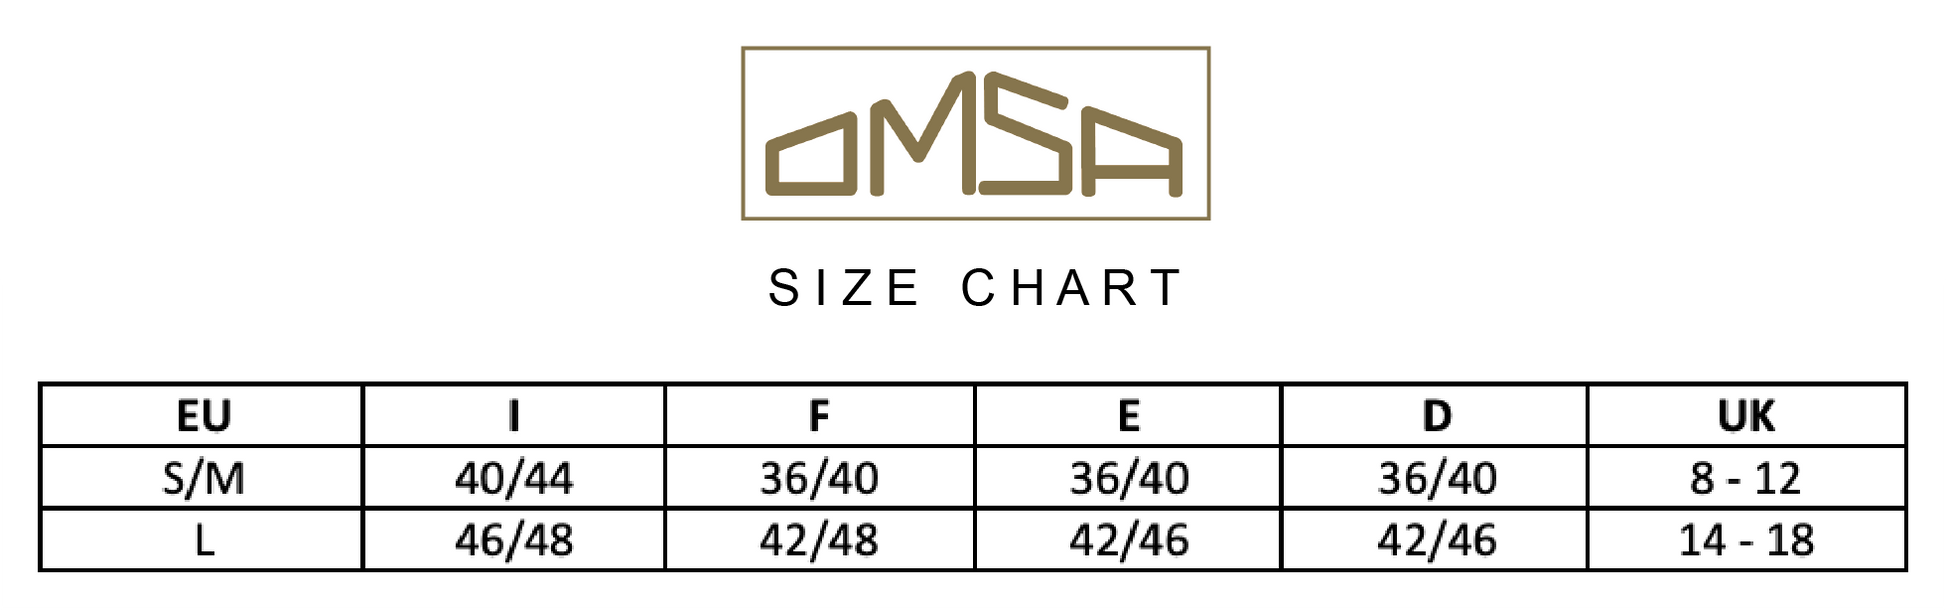 Omsa Smooth Leggings Size Chart